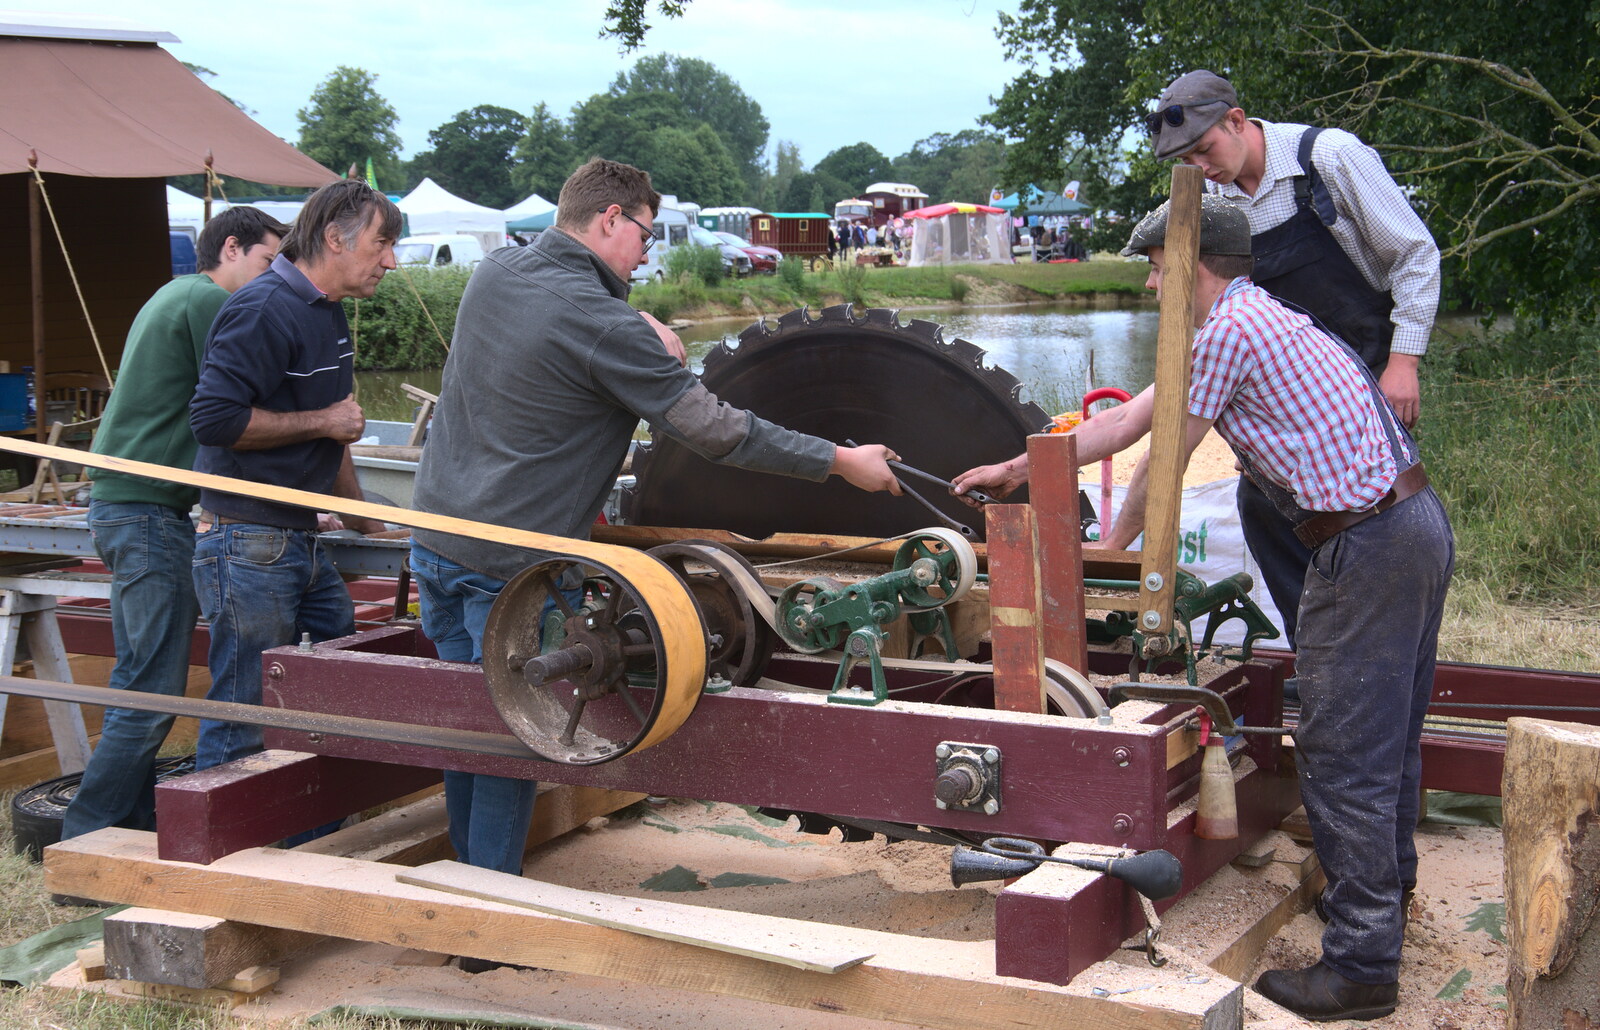 Adjustments are made to the saw from The Formerly-Known-As-The-Eye-Show, Palgrave, Suffolk - 17th June 2018